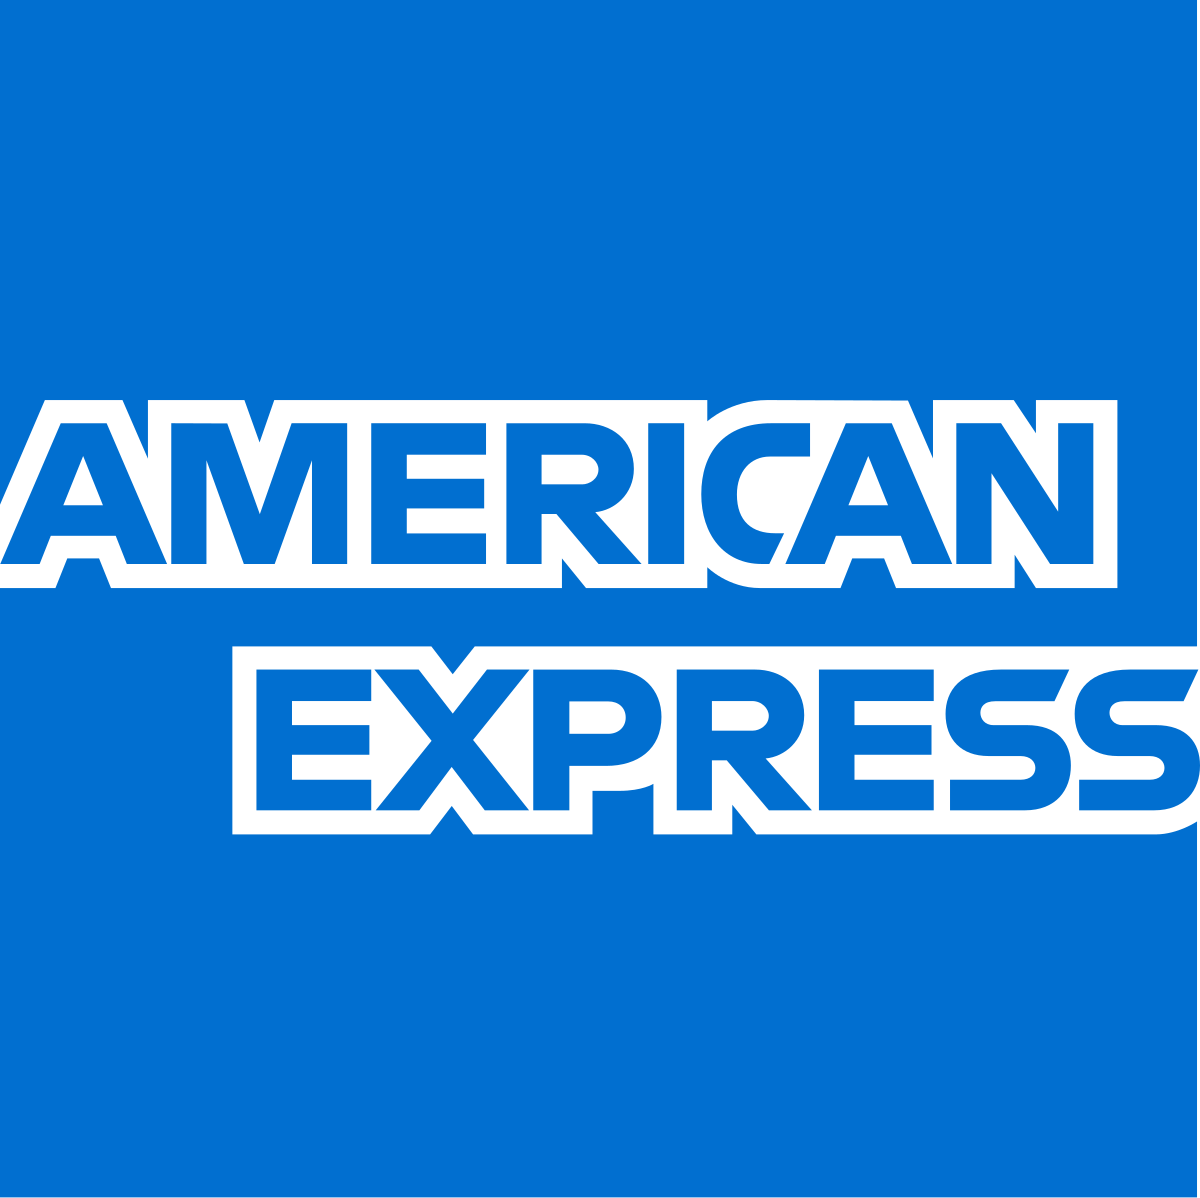 AMEX offer: Split a charge, get paid back $15+ to your Card, get a $5 bonus credit up to 3x (YMMV)